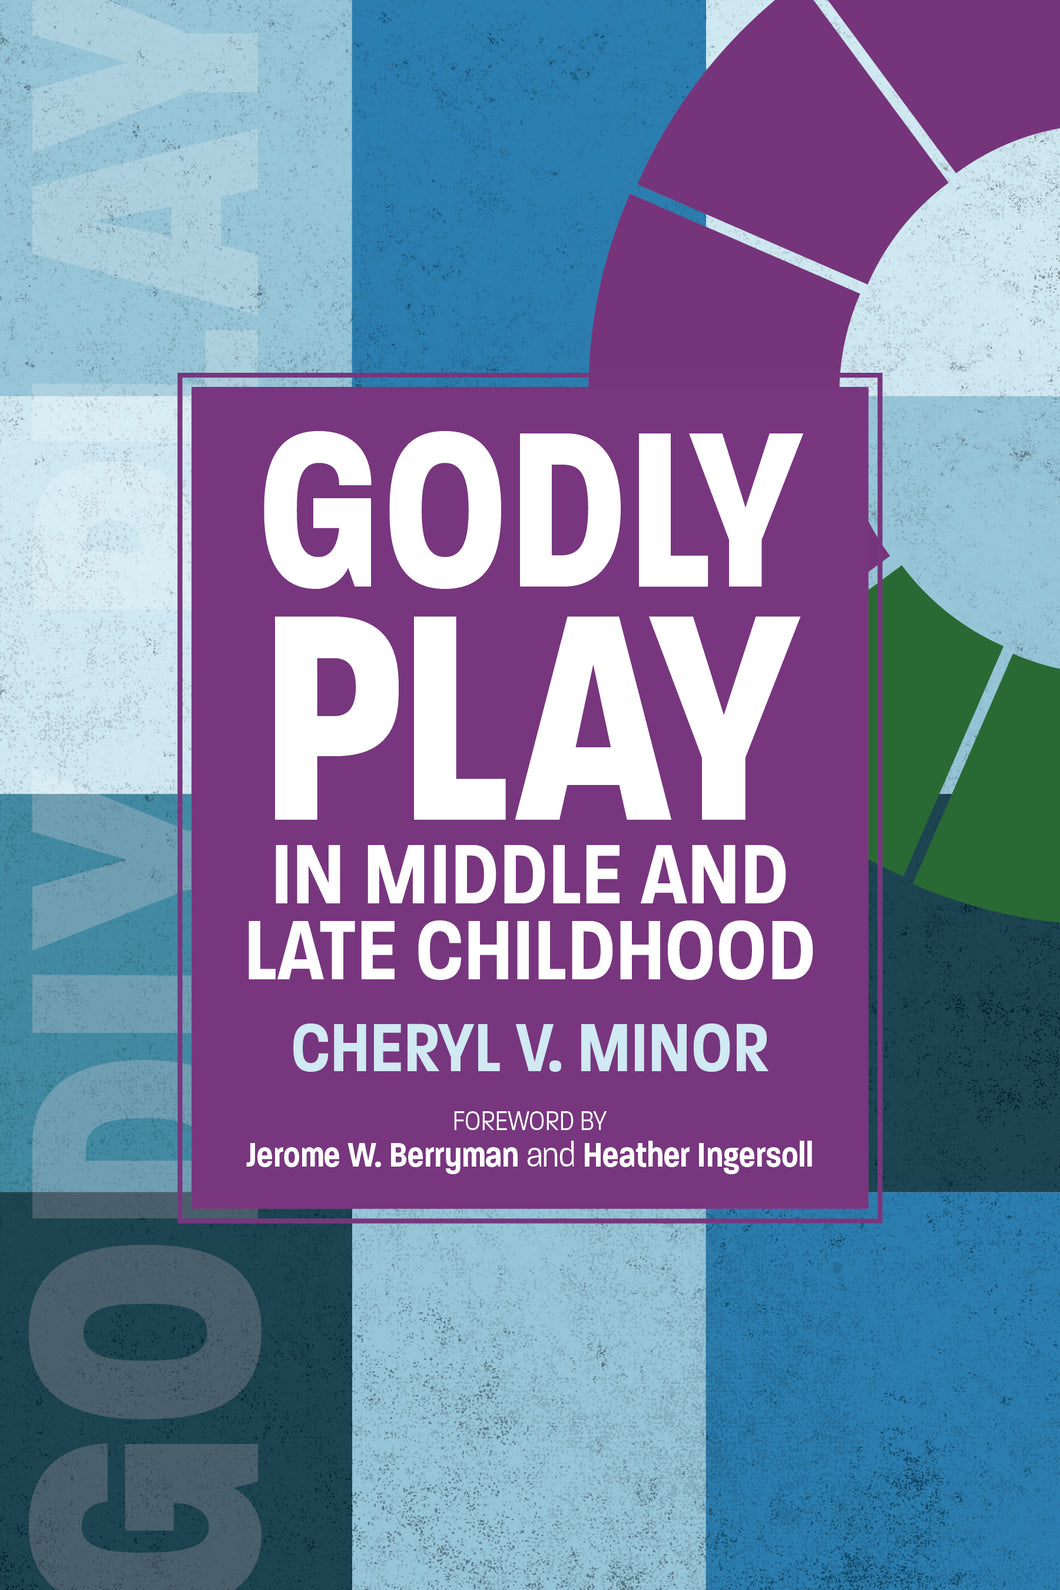 Godly Play in Middle and Late Childhood by Cheryl V. Minor